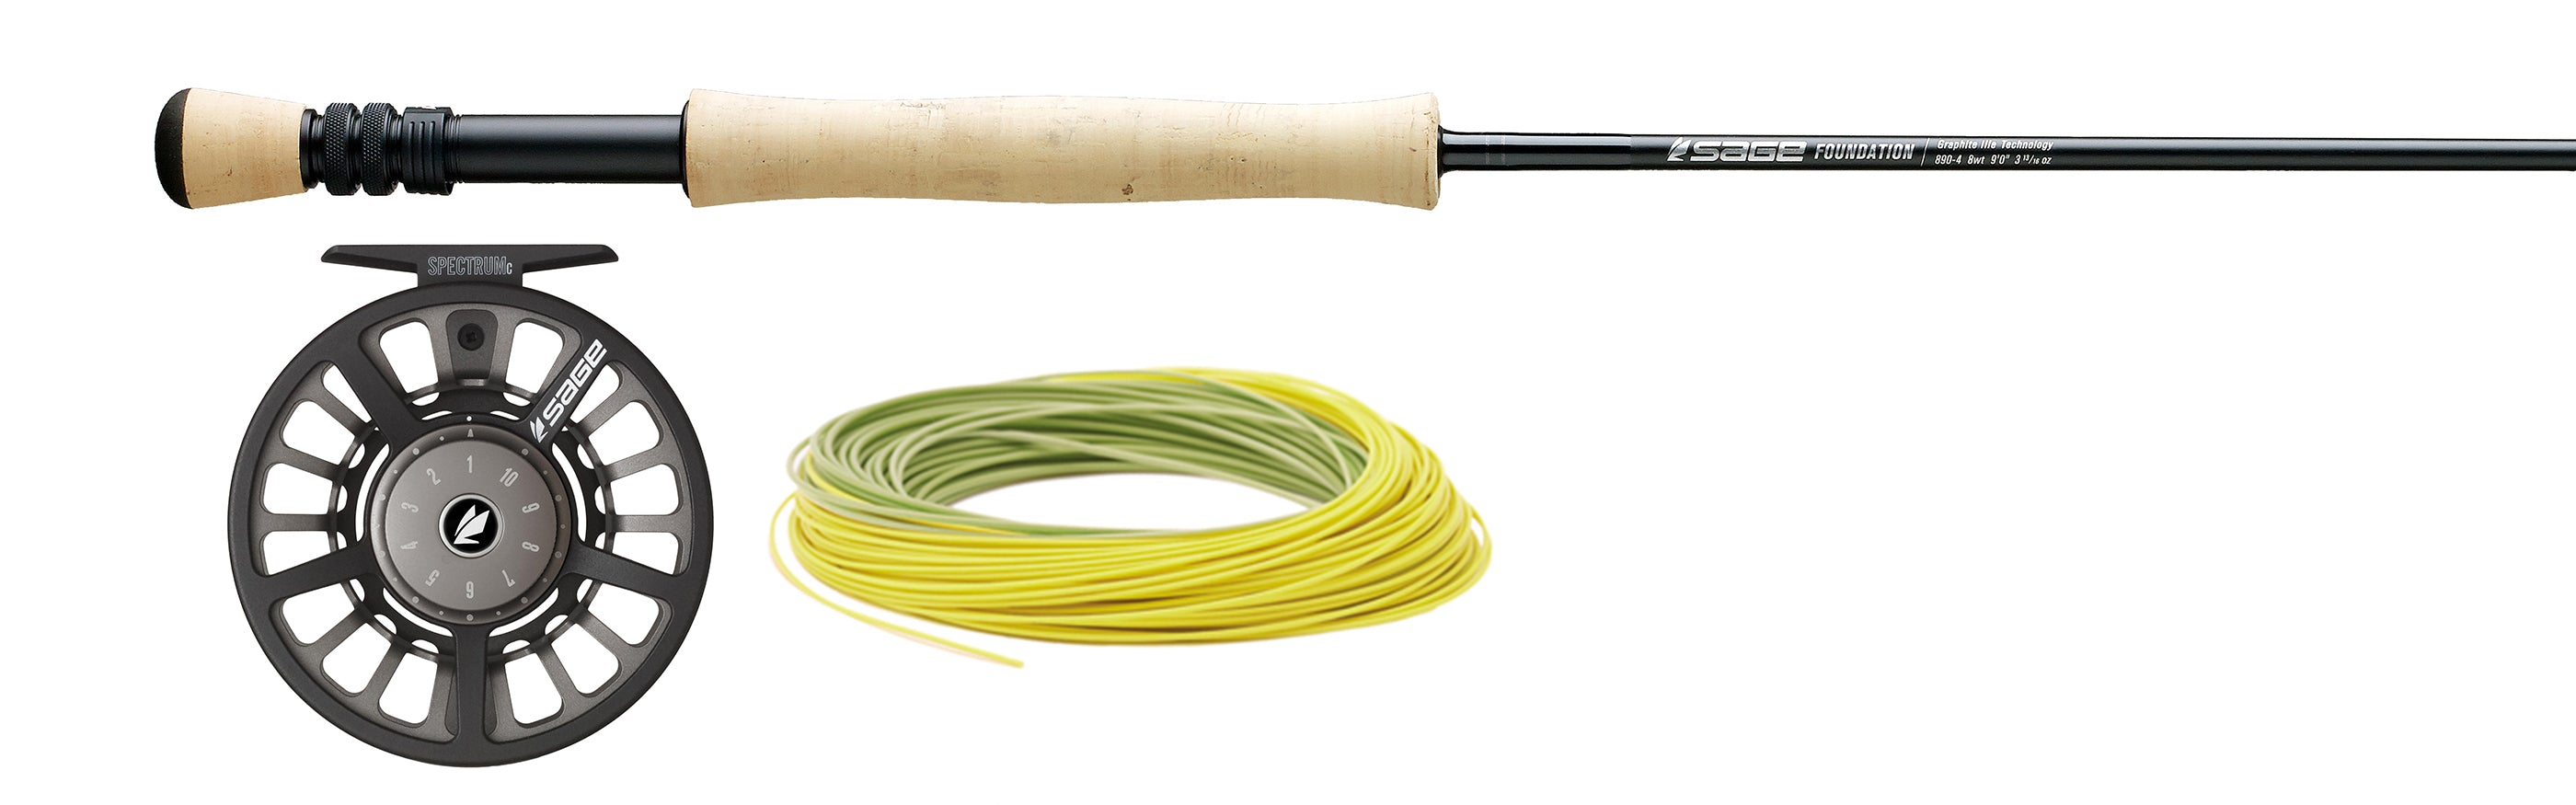 Sage Foundation Fly Rod and Reel Package Combo with Fly Line - 6, 7, or 8 WT